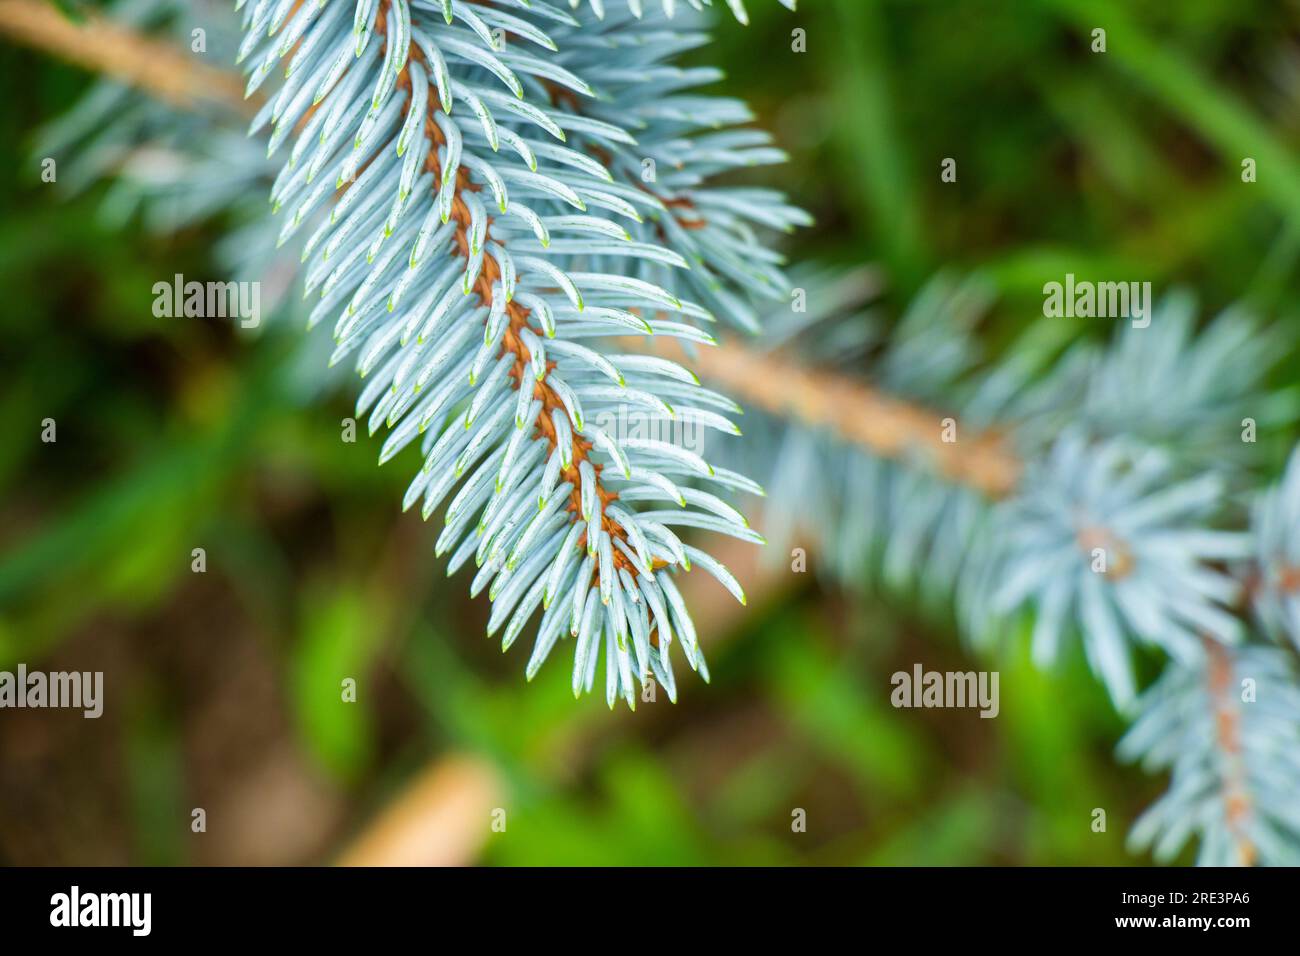 Abies procera Glauca, gray and blue pine Stock Photo